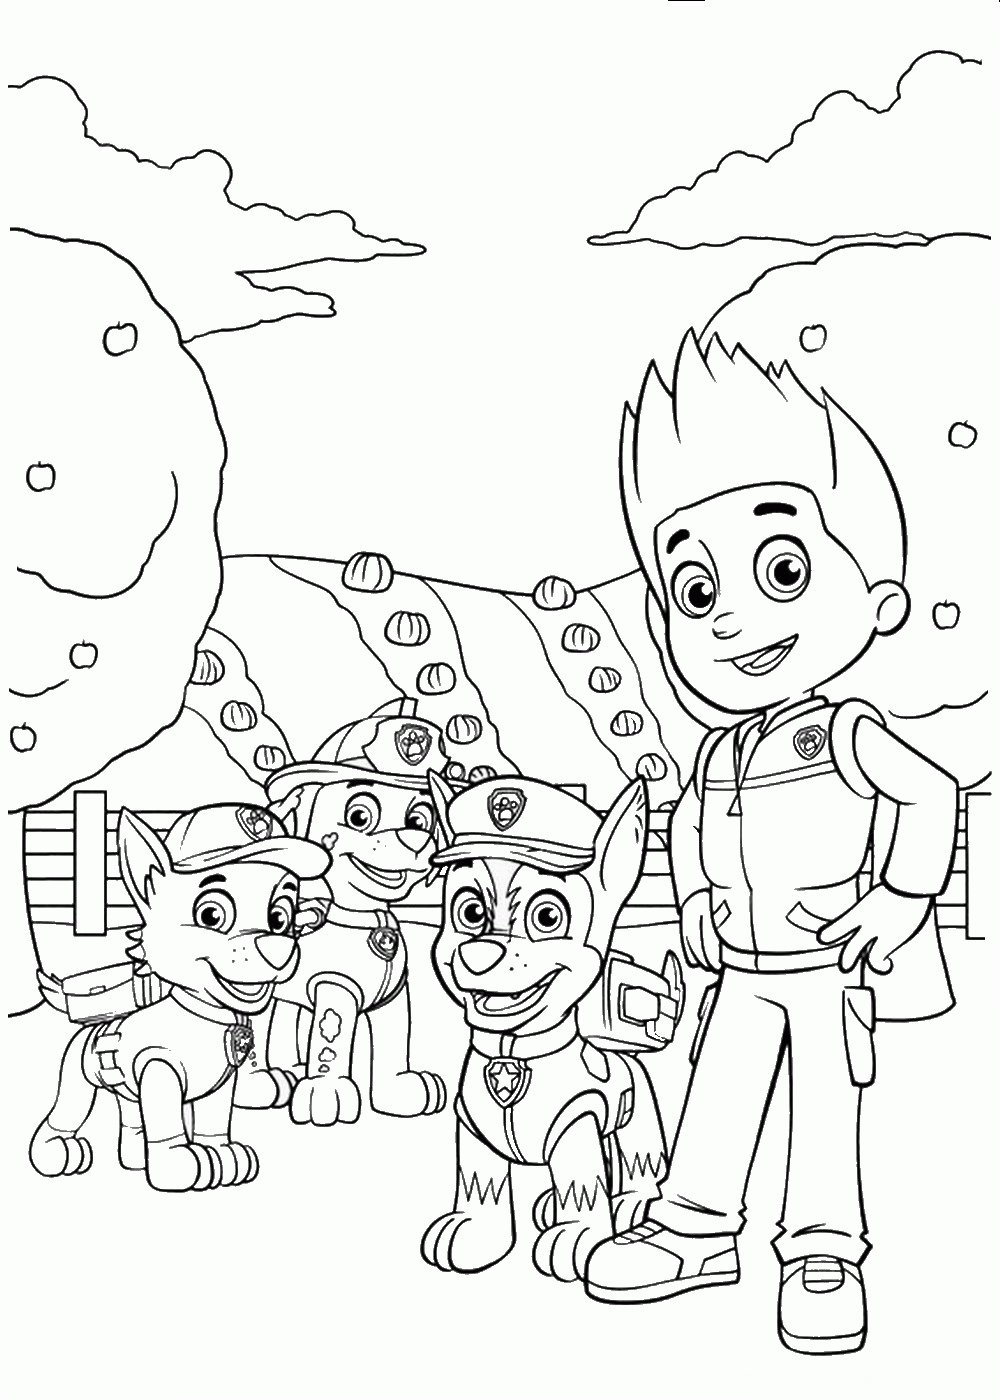  PAW Patrol Halloween Coloring Pages - PAW Patrol